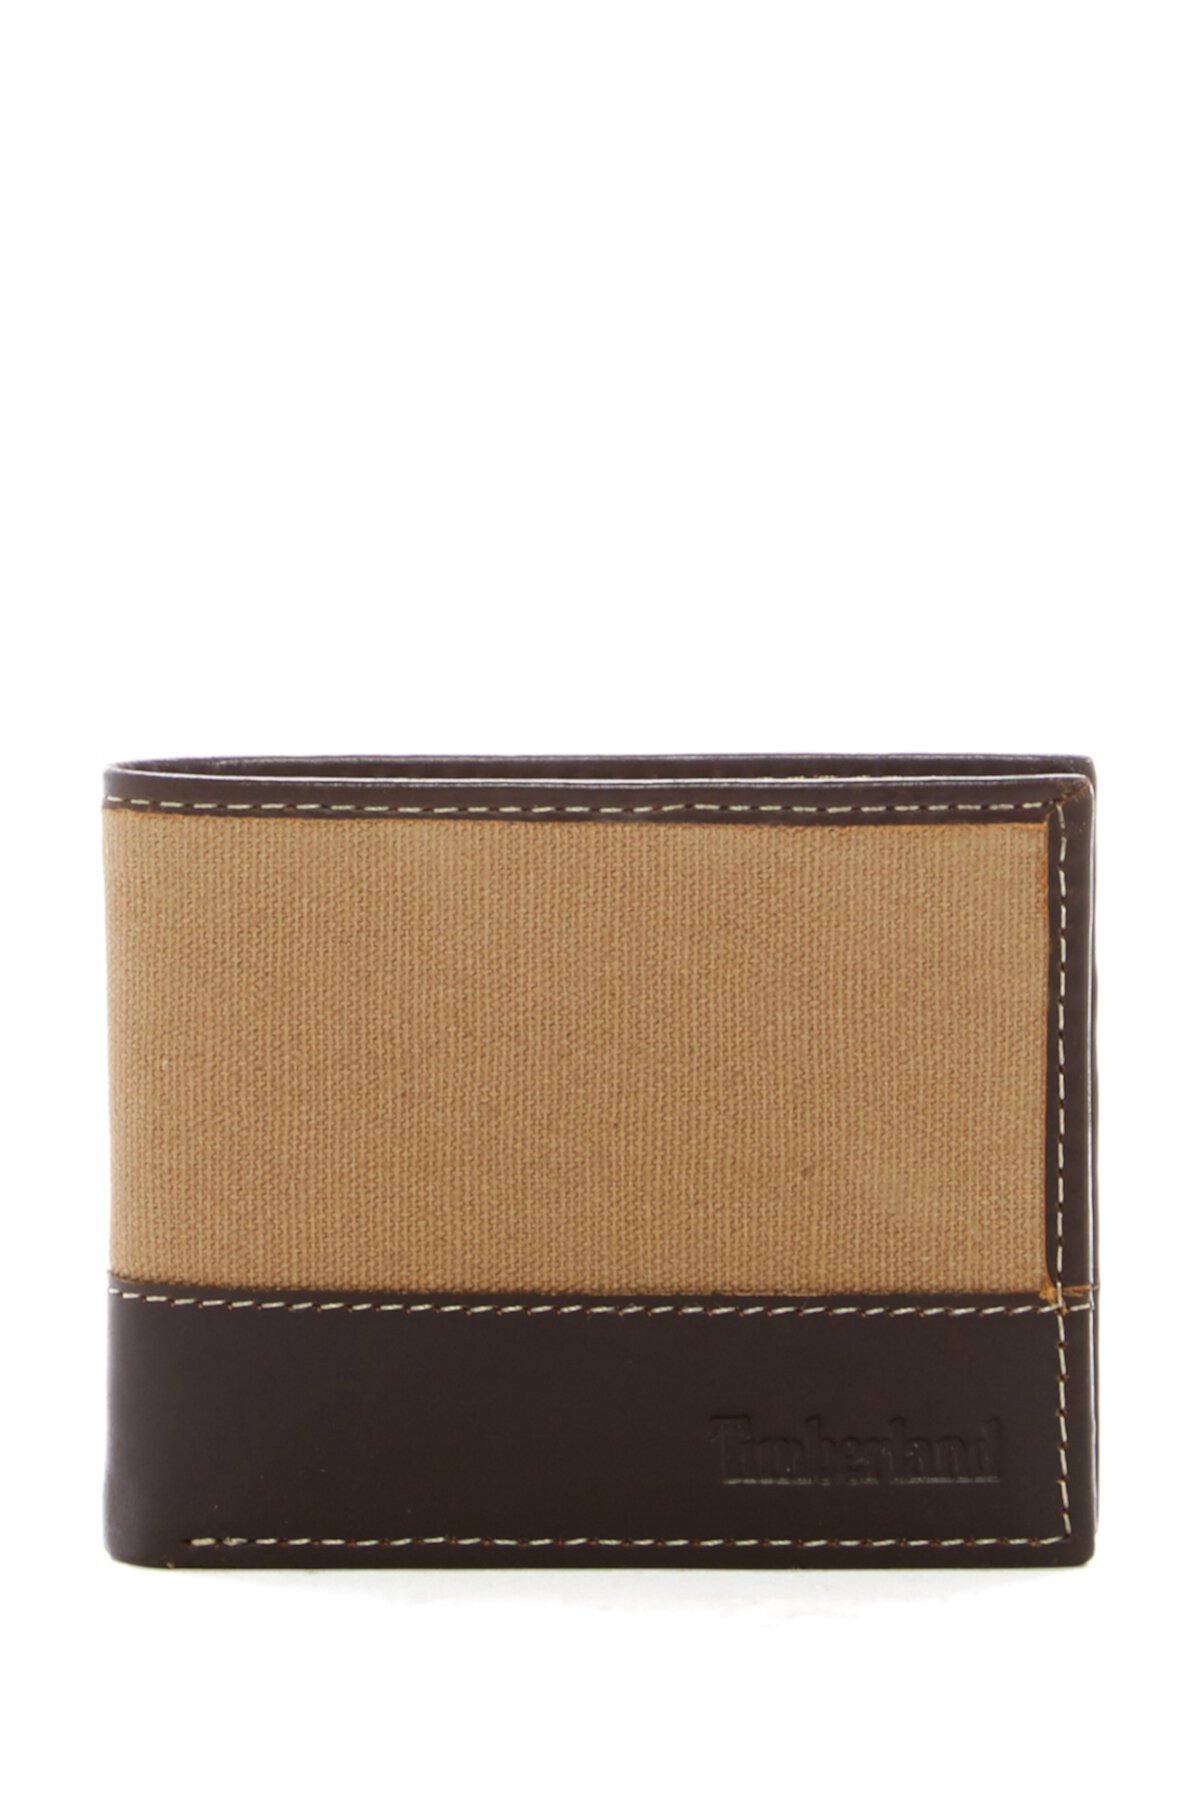 Baseline Canvas Leather Passcase Wallet Timberland